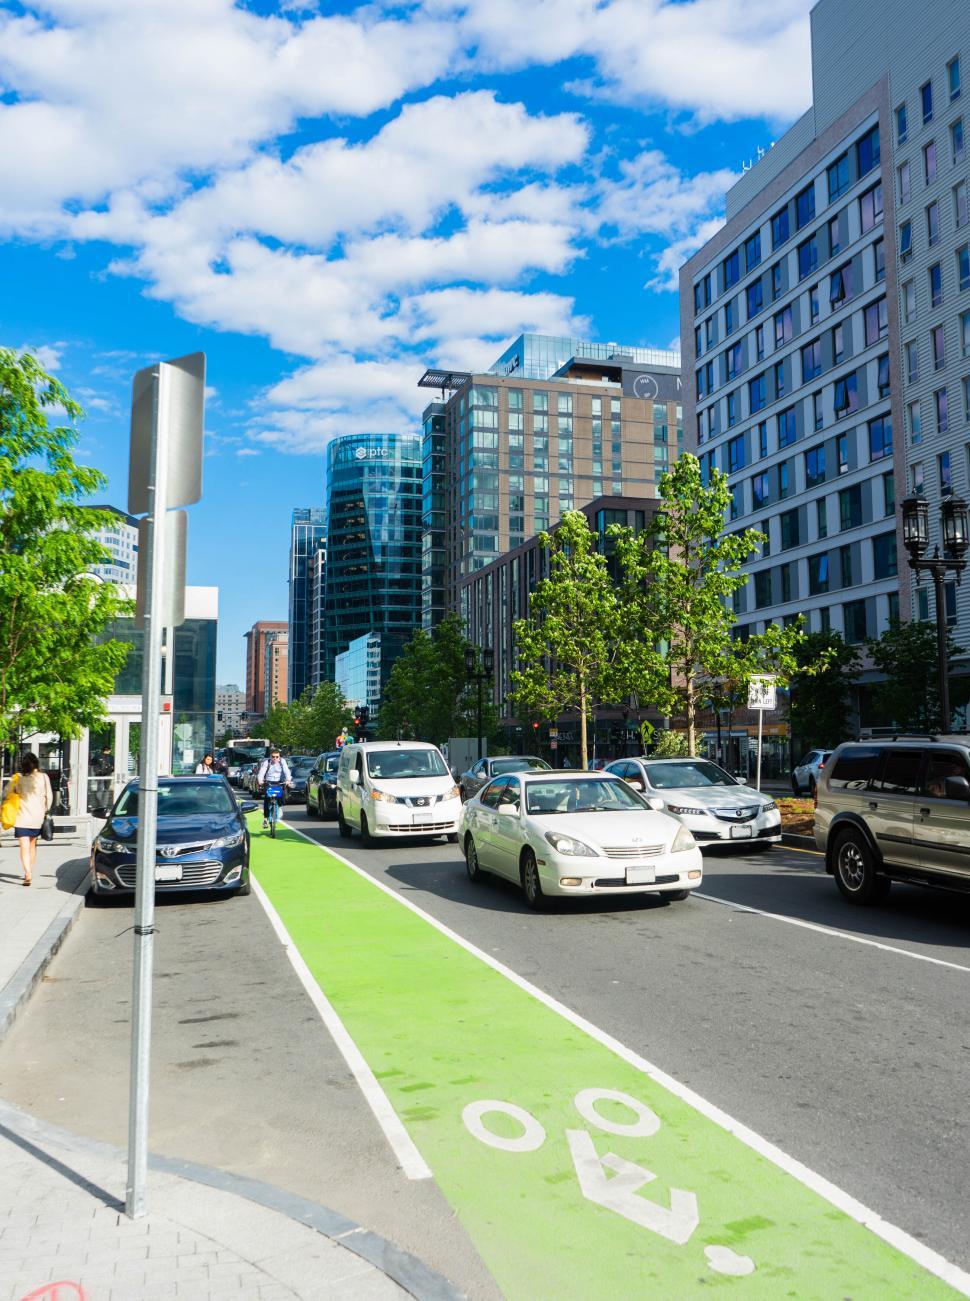 Free Image of Busy city street with colorful bike lane 